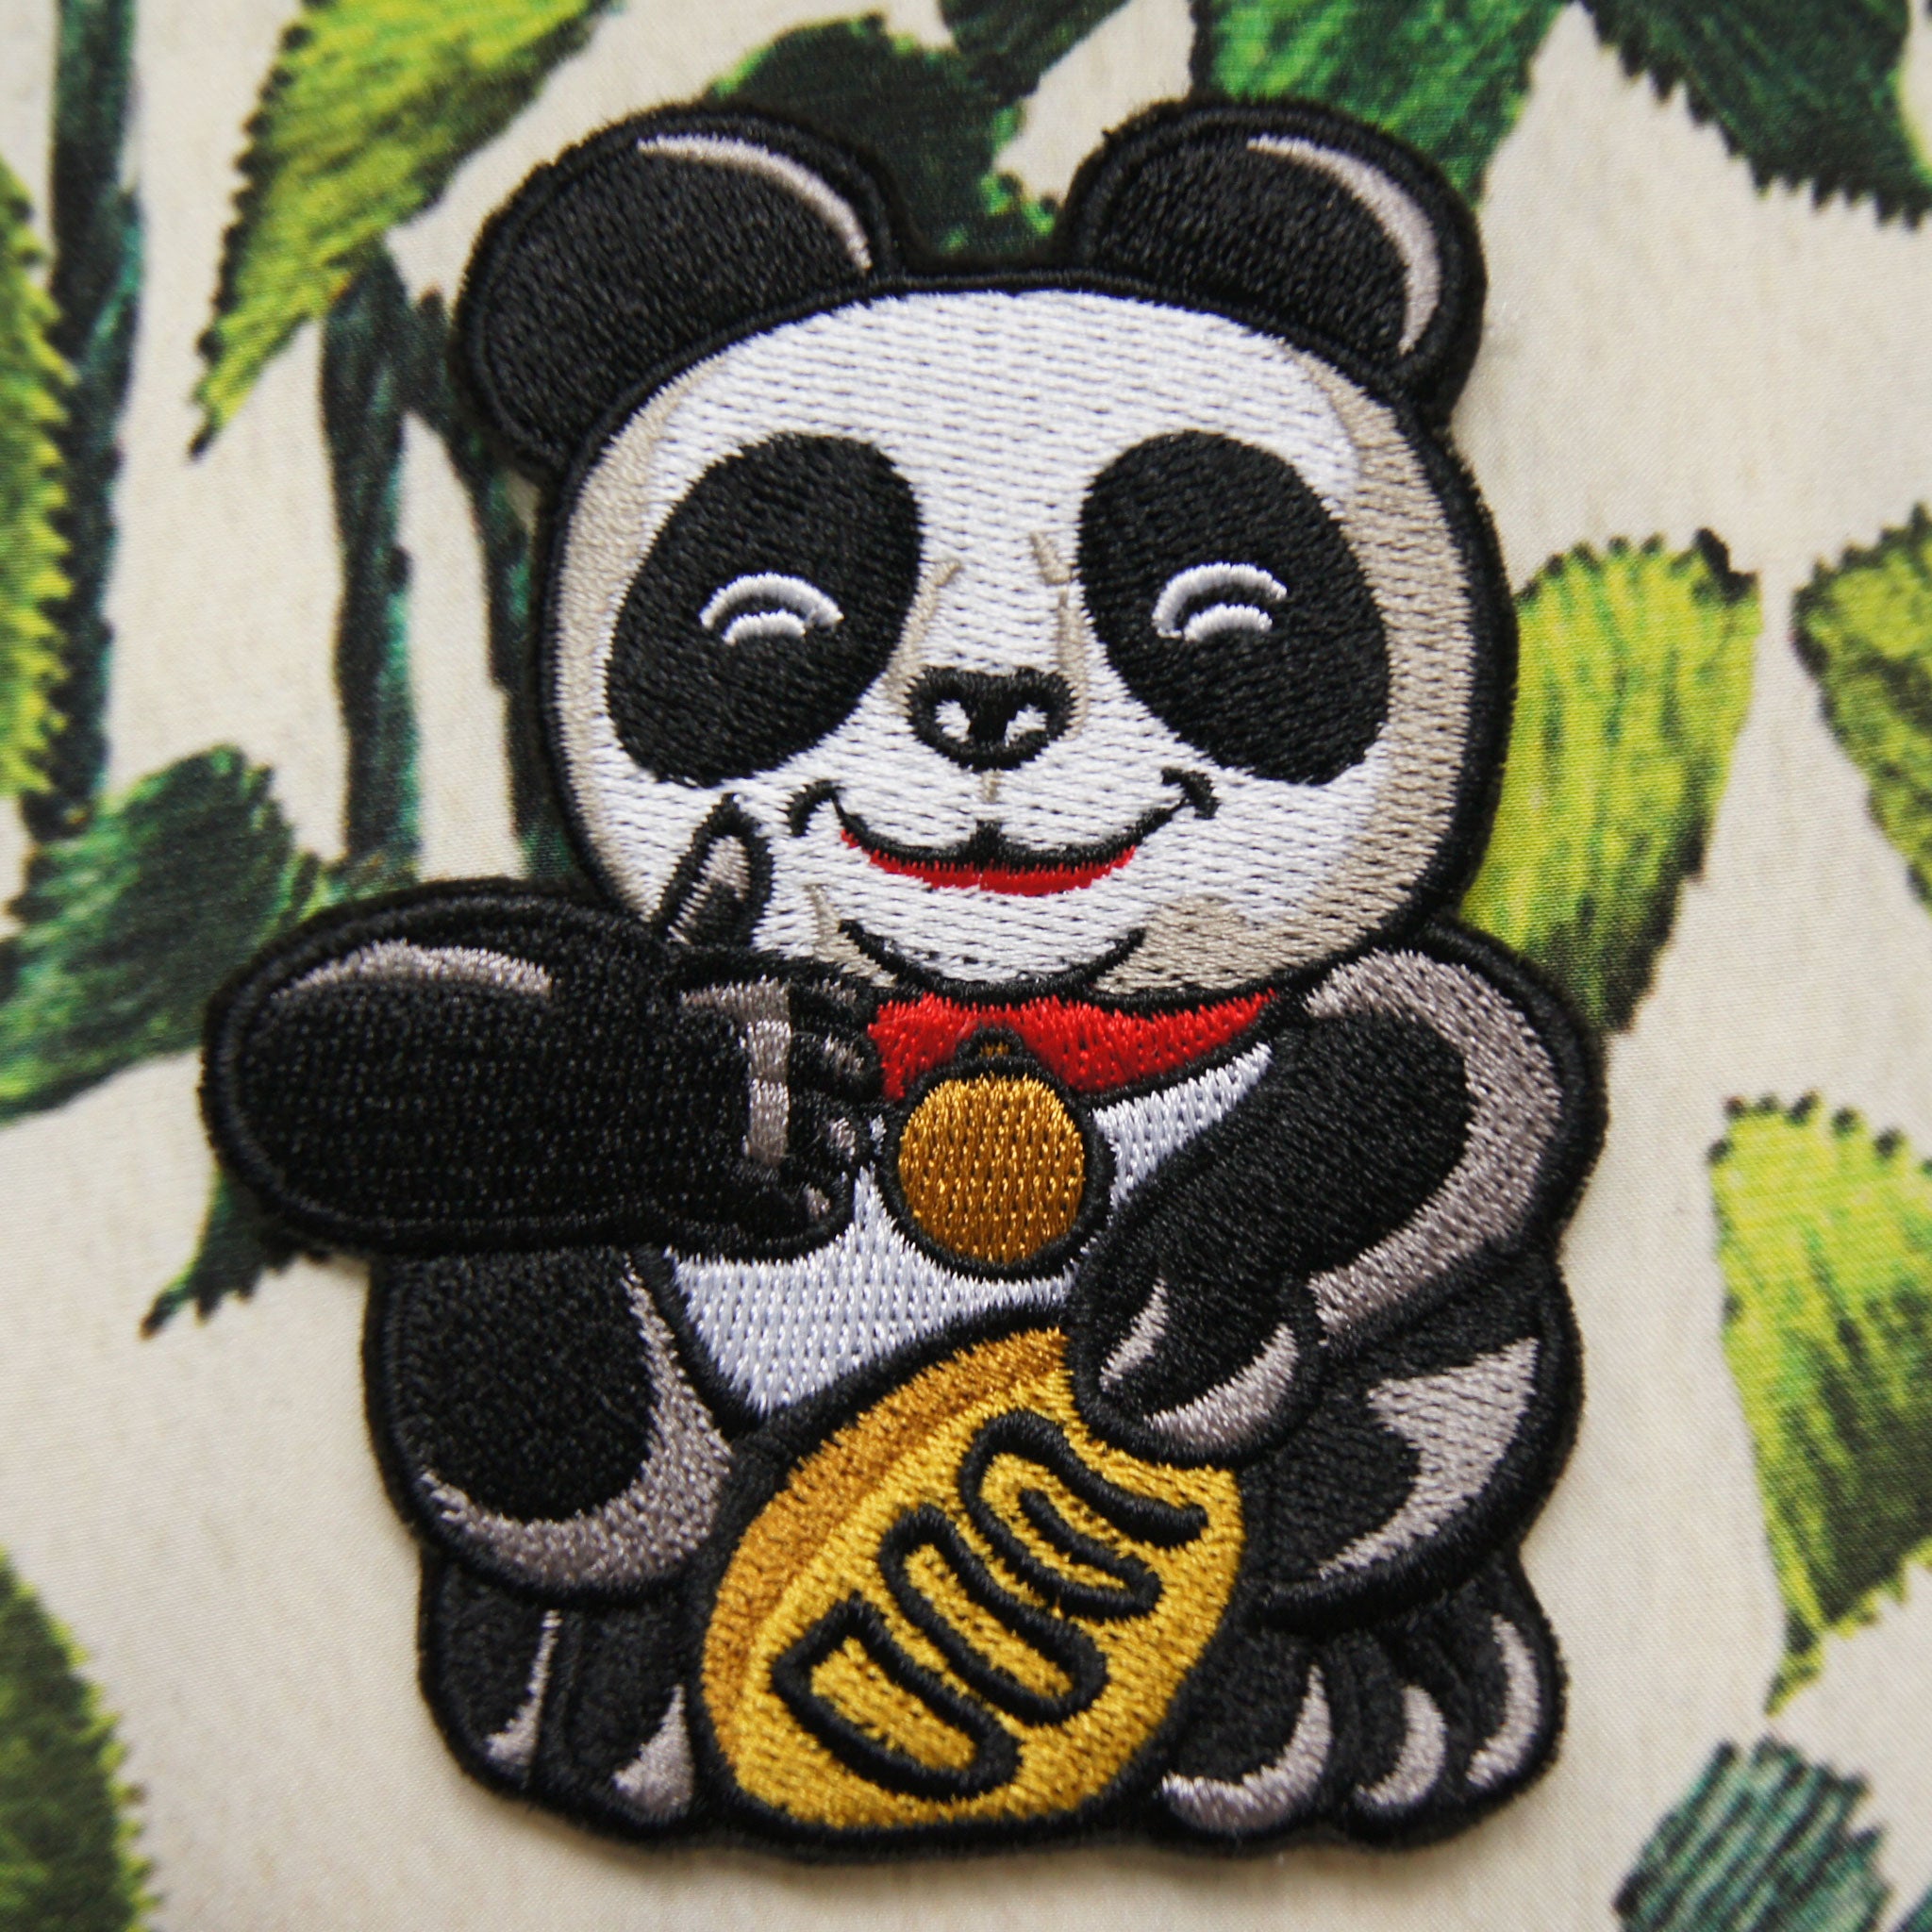 'Panda (Thumbs Up)' embroidered patch